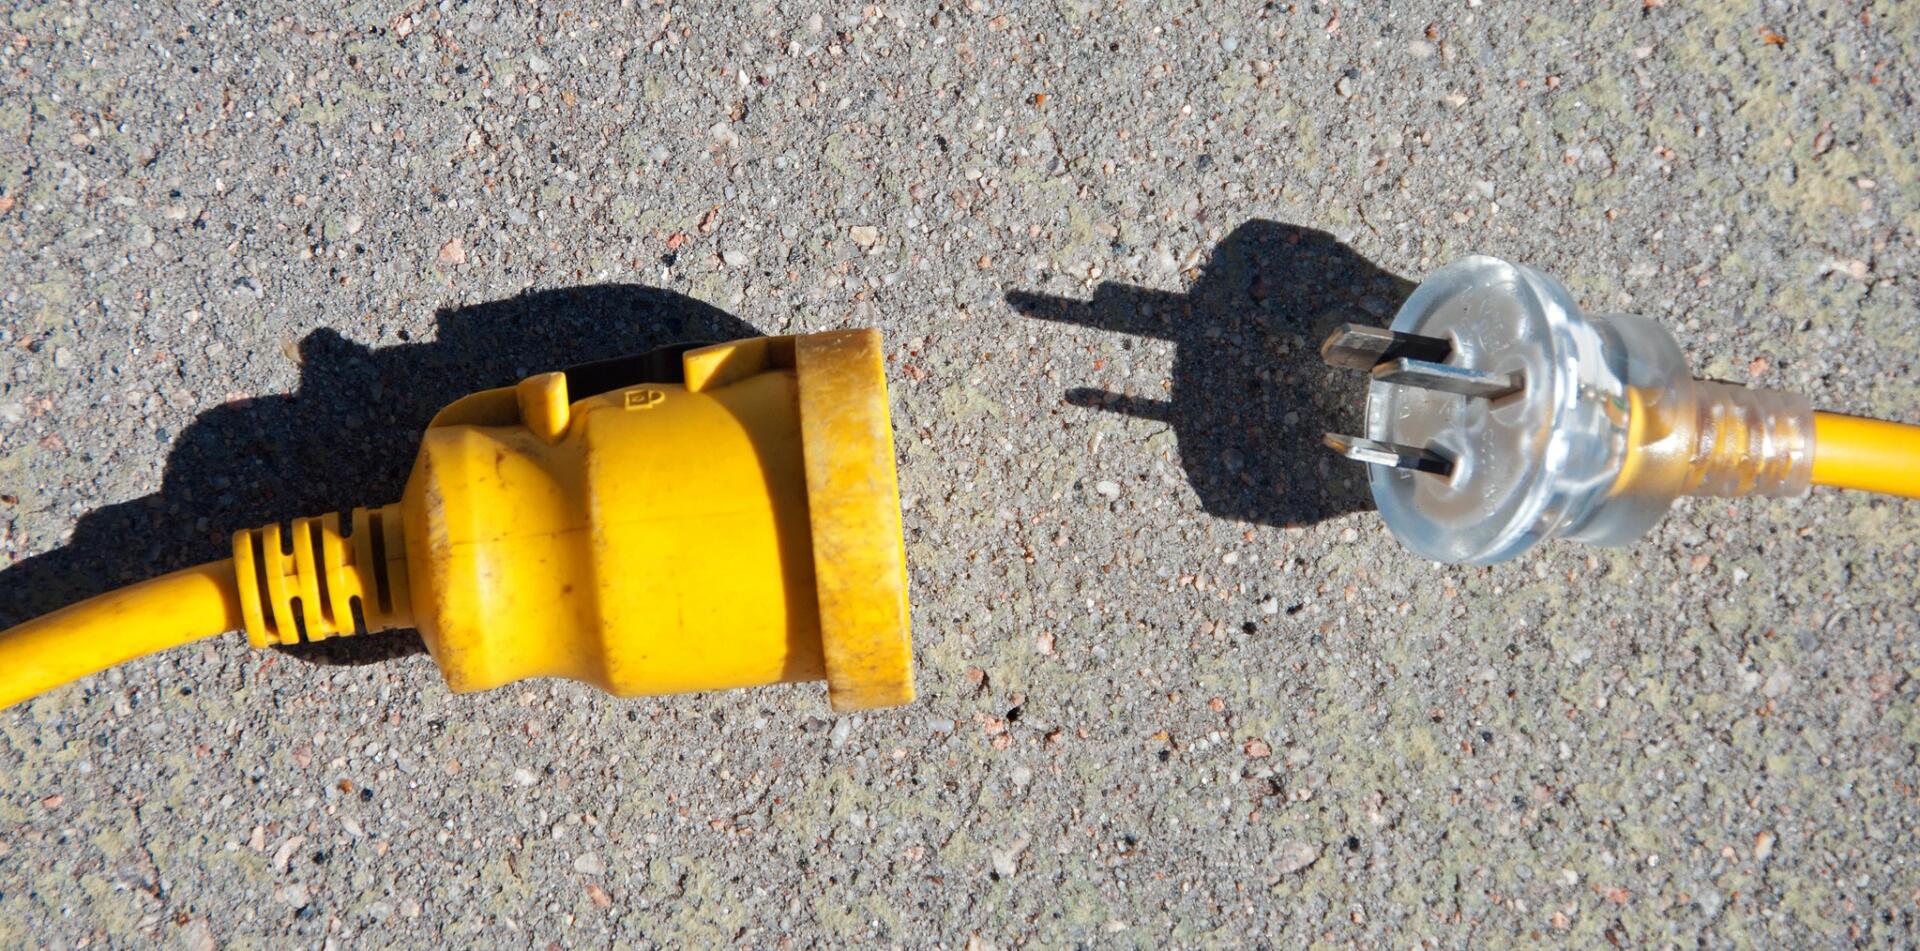 Image of a yellow plug disconnected from a yellow socket lying on asphalt